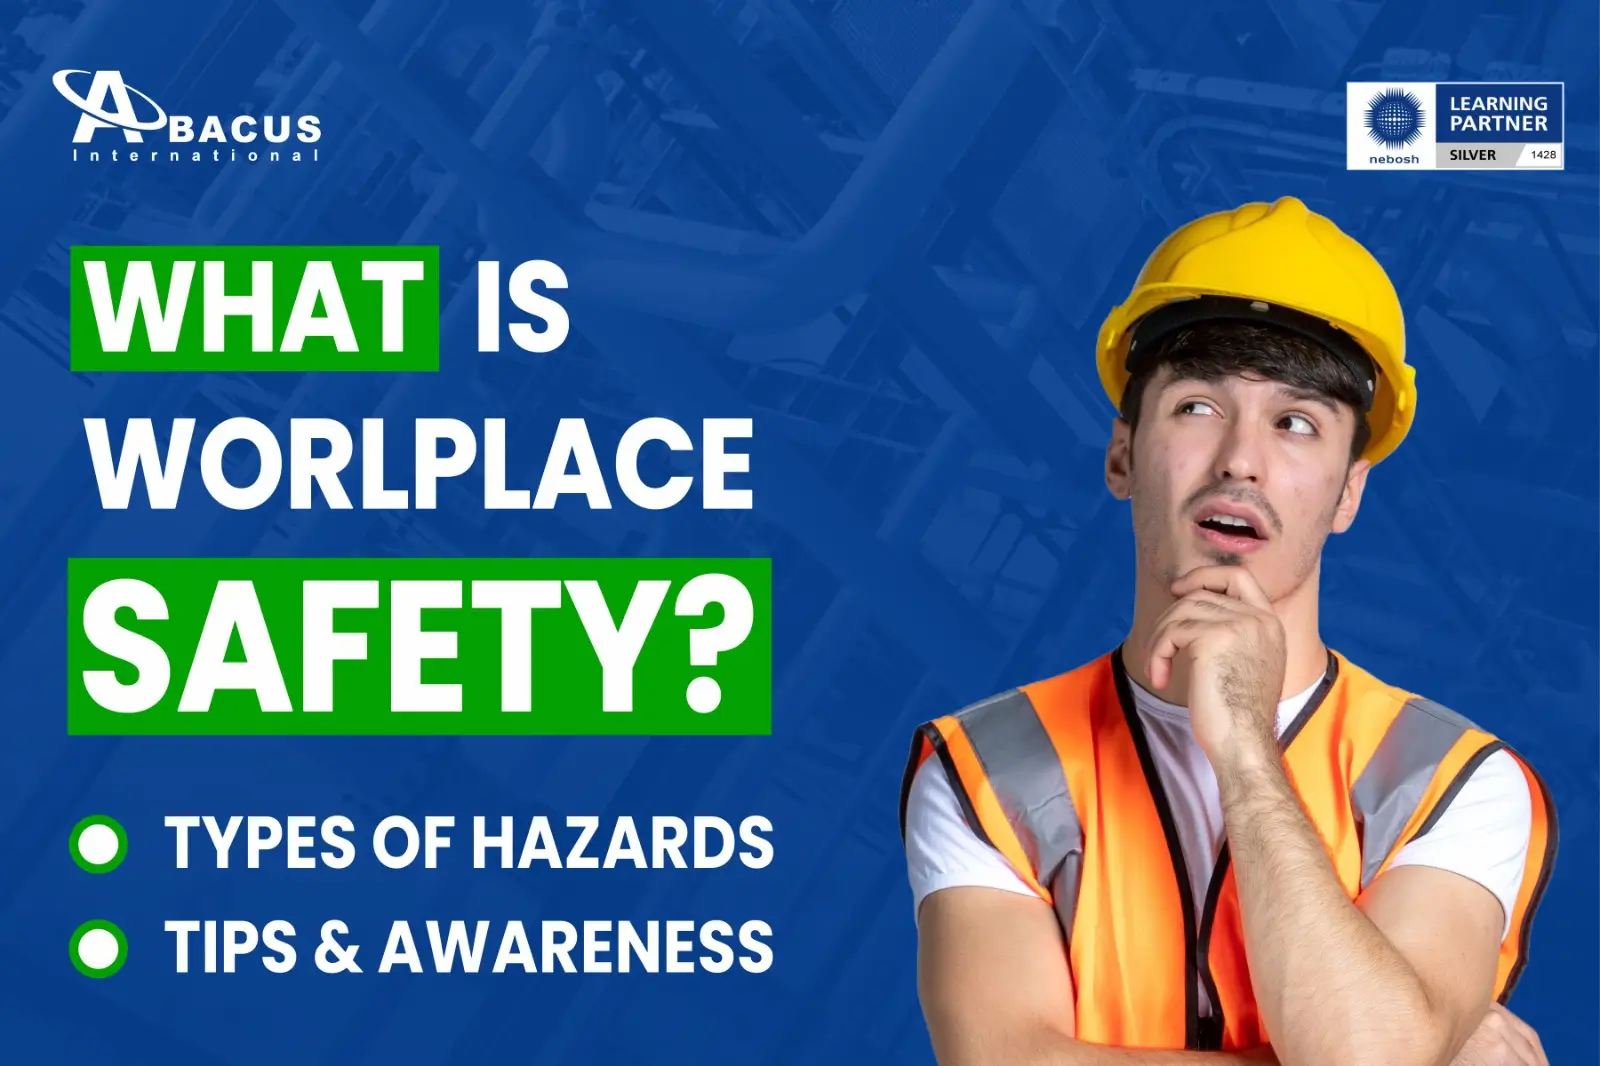 All You Need to Know About Workplace Safety